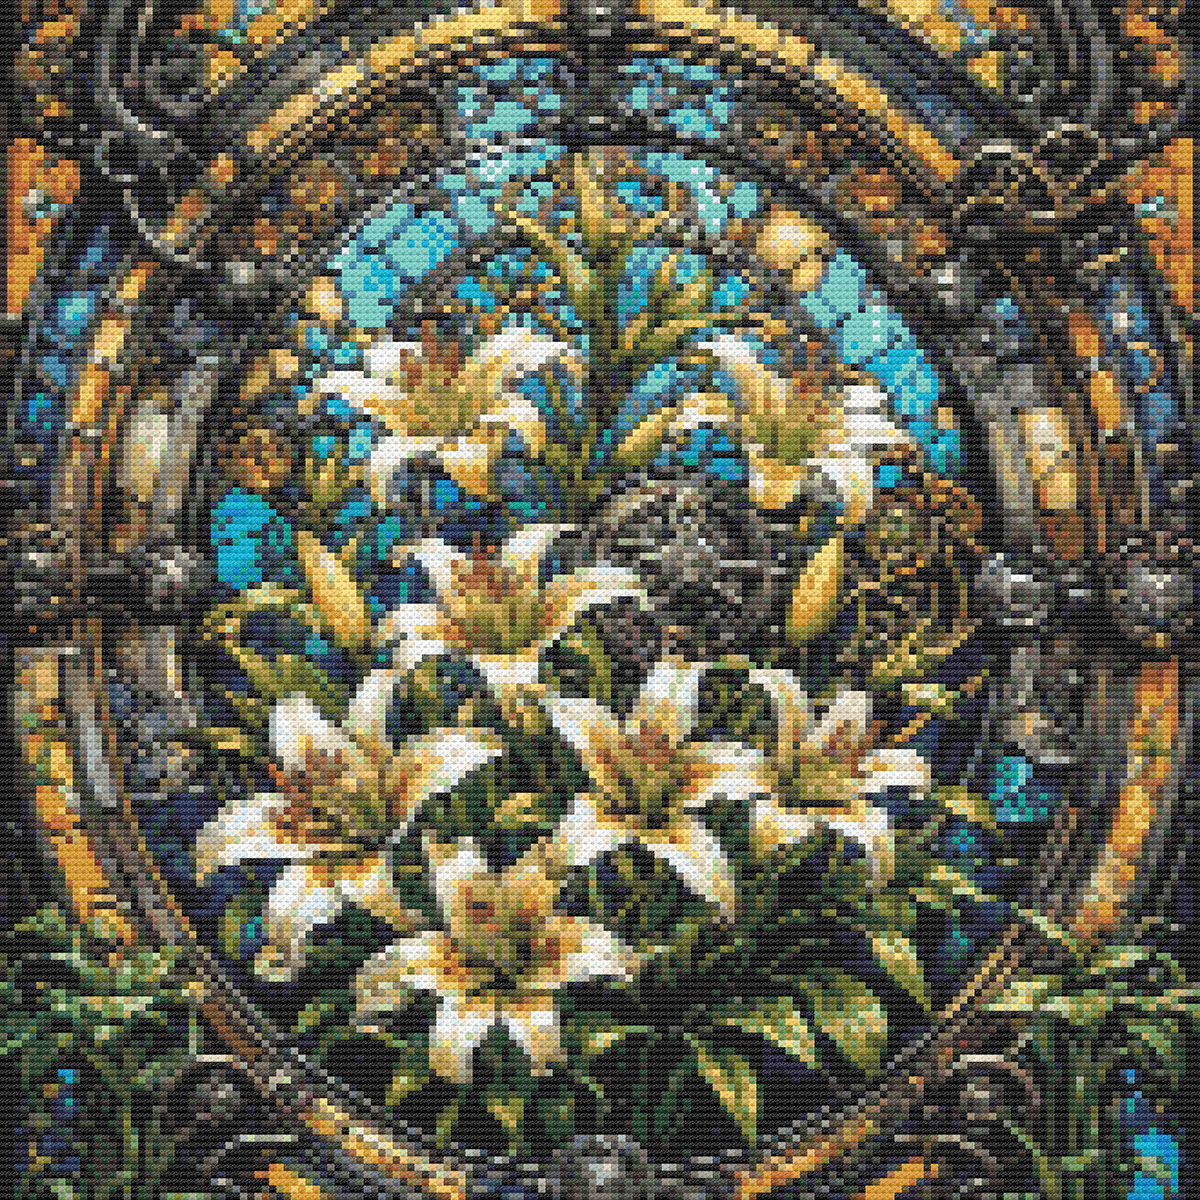 Lilies and Stained Glass Round rendition image